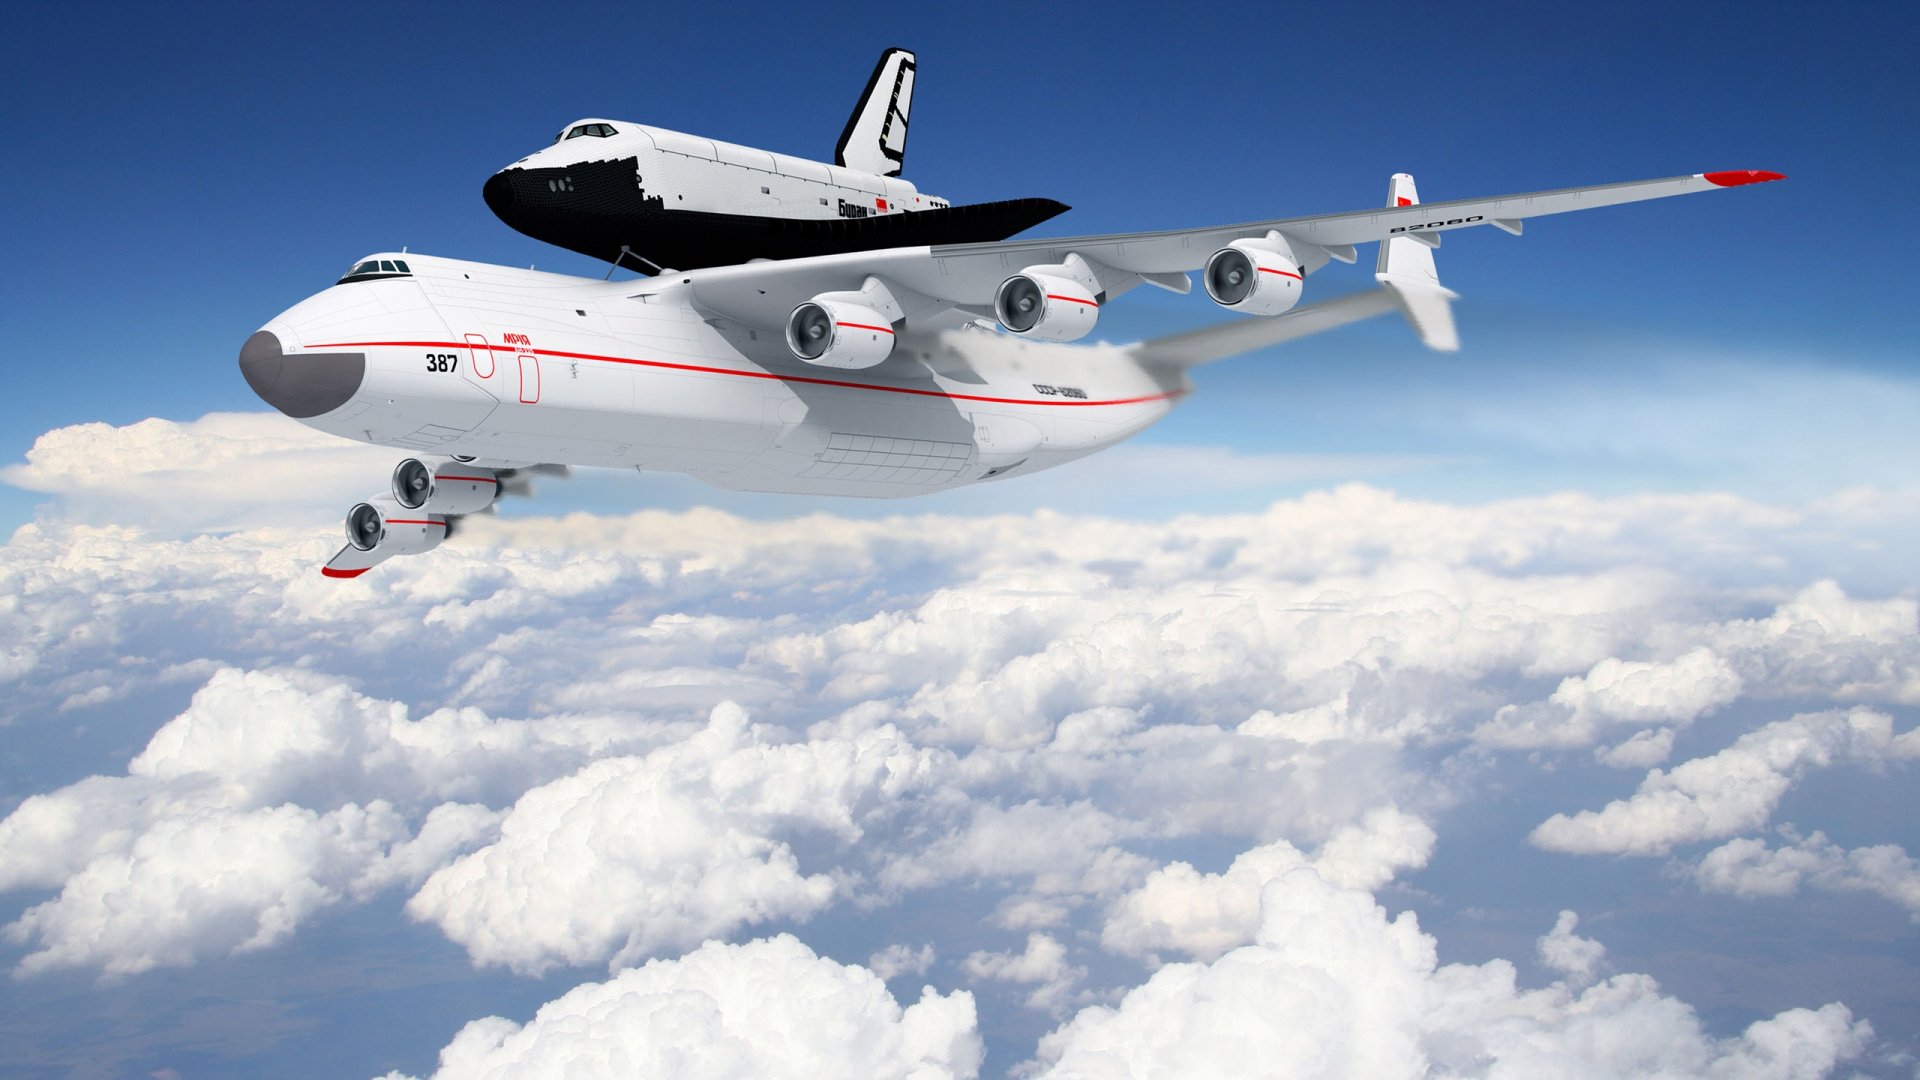 HD desktop wallpaper featuring an air-launched space shuttle piggybacking on a jumbo jet flying above the clouds.